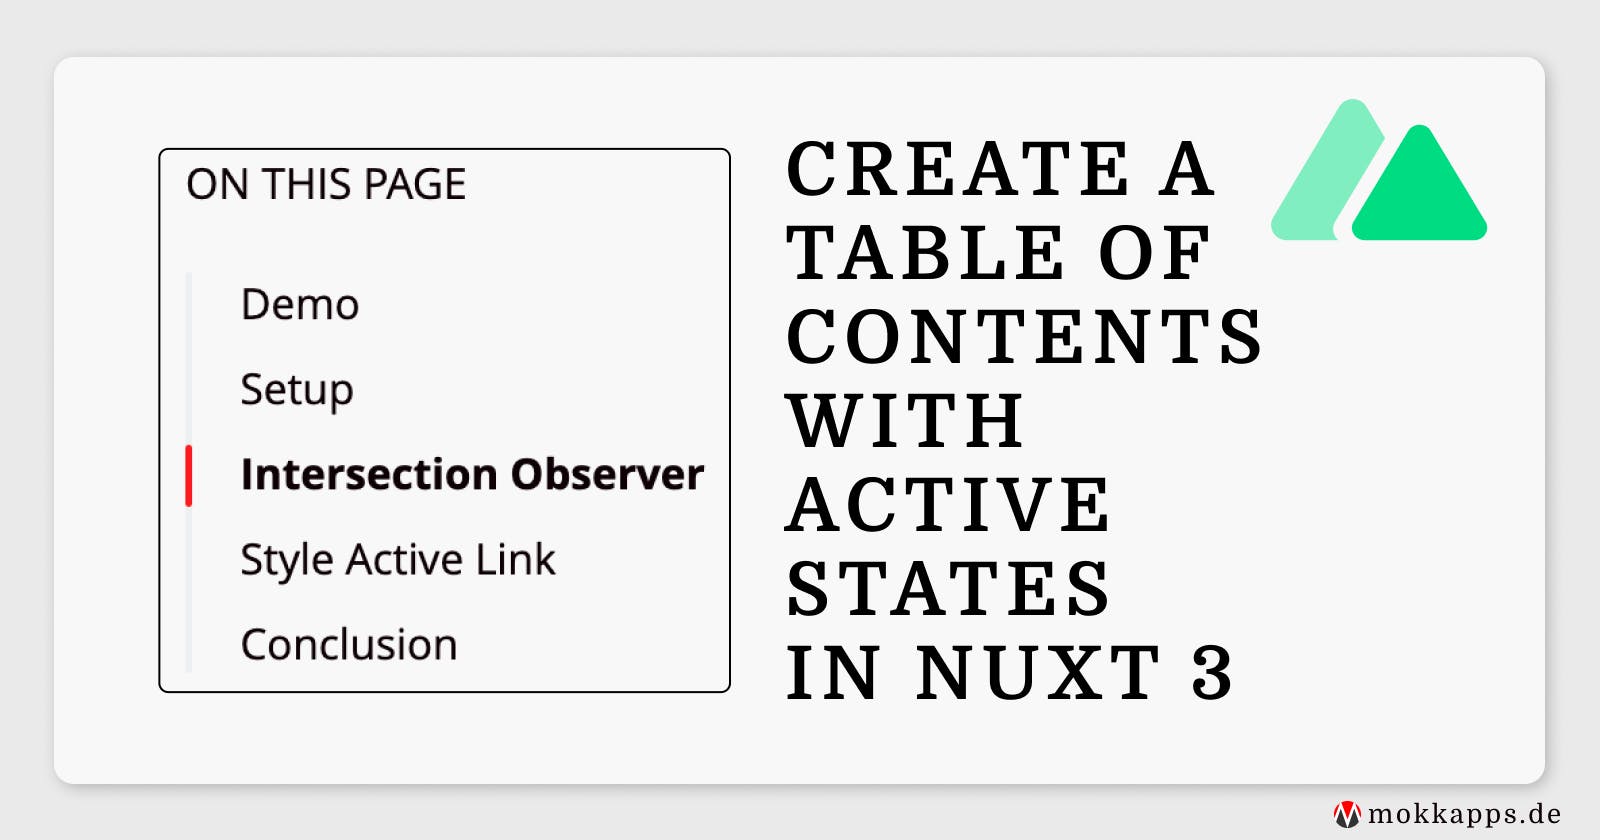 Create a Table of Contents With Active States in Nuxt 3